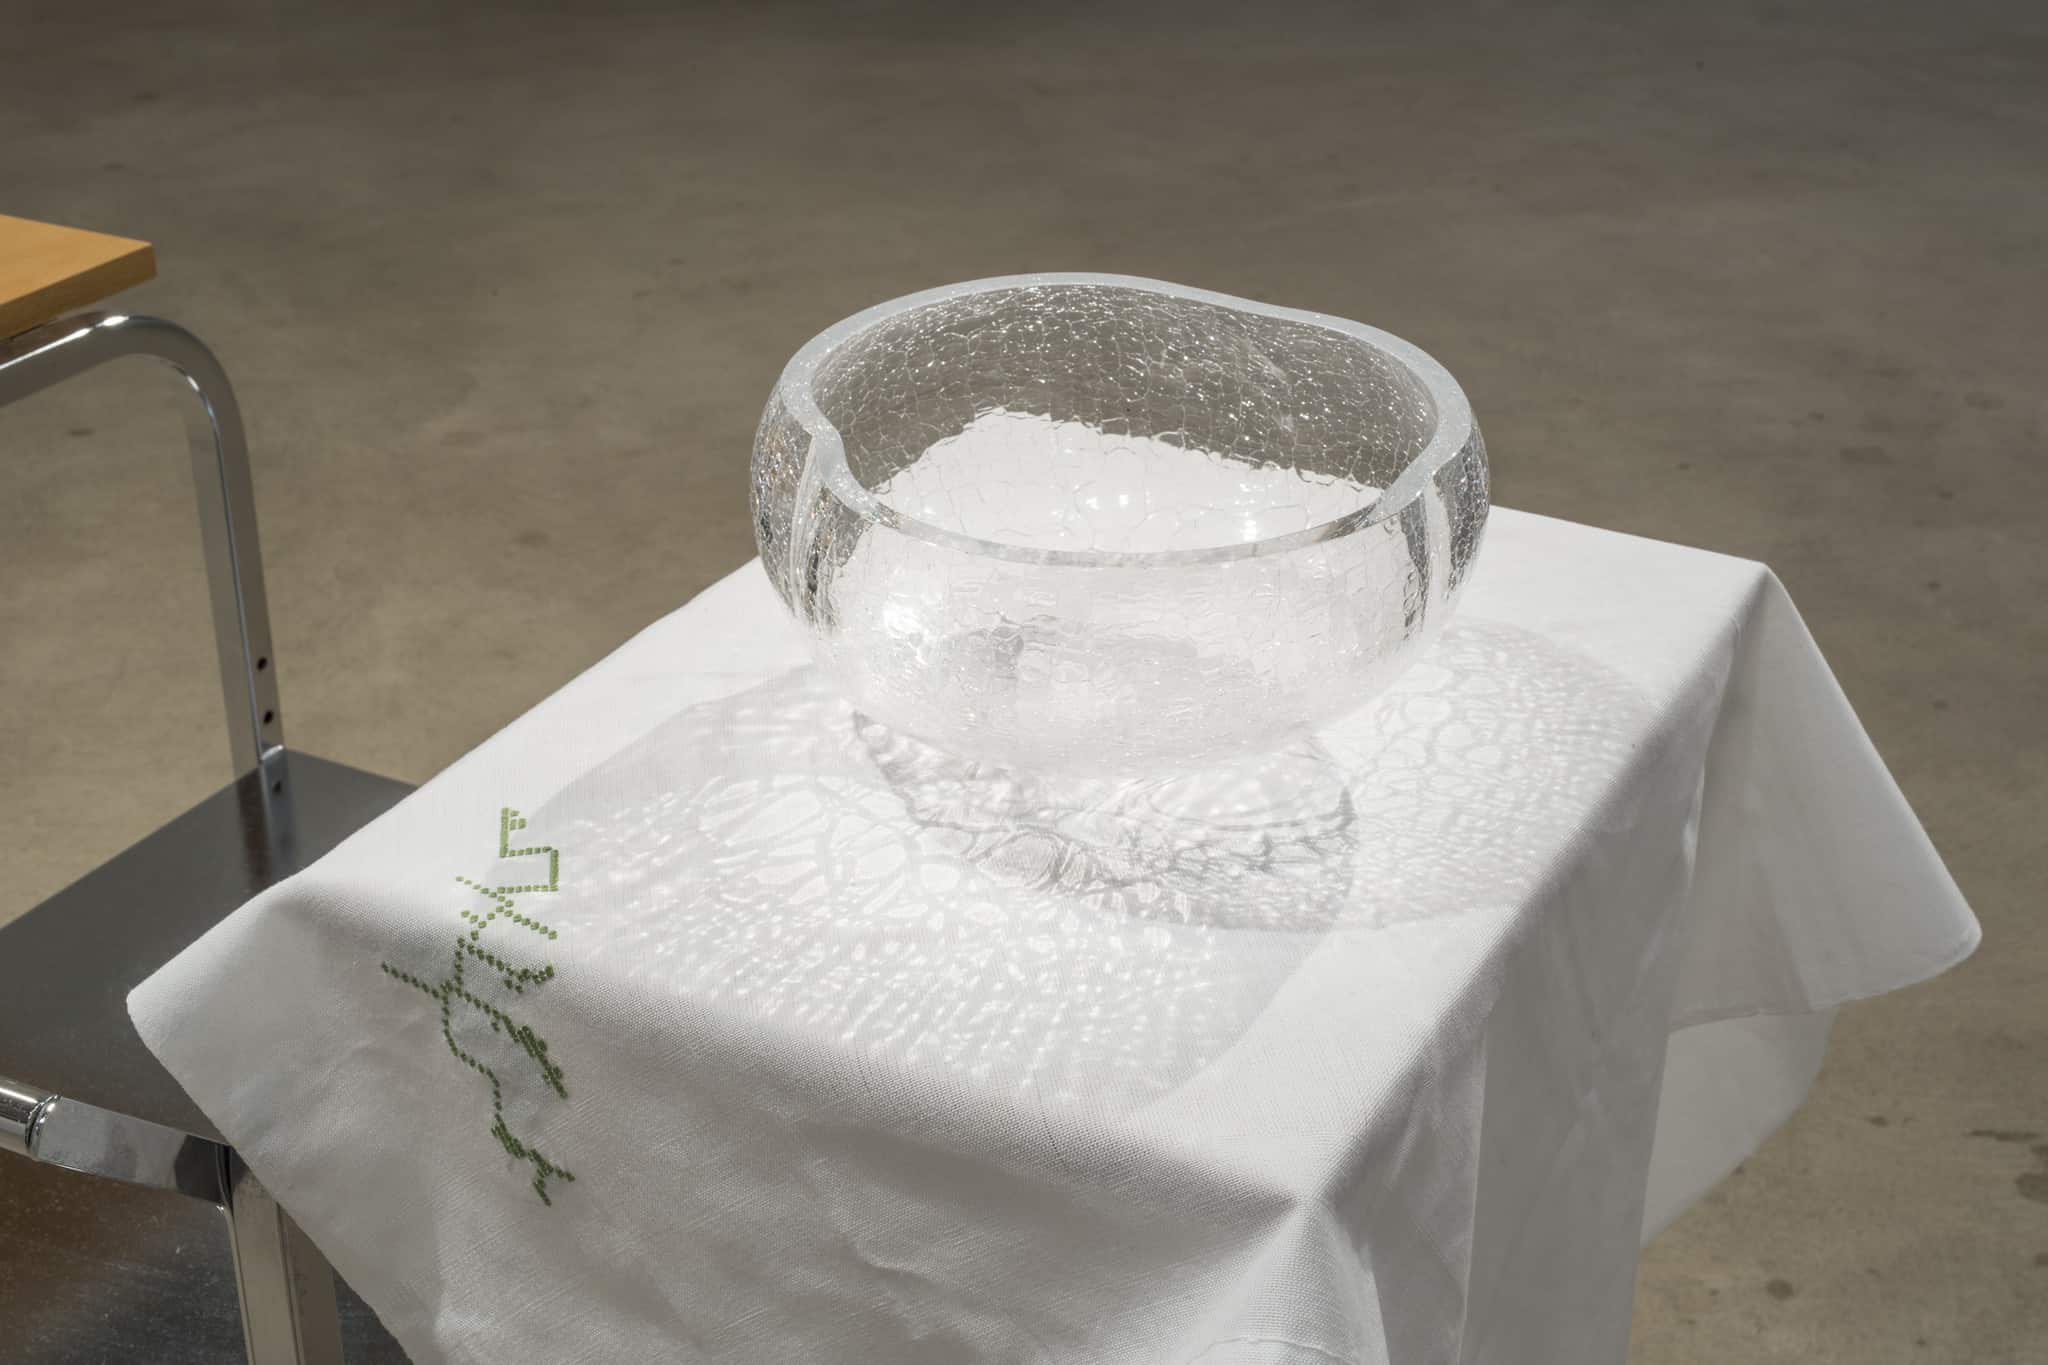 Cotton tablecloth by Ekaterini & Marietta hosting a glass bowl by Joonas Laakso